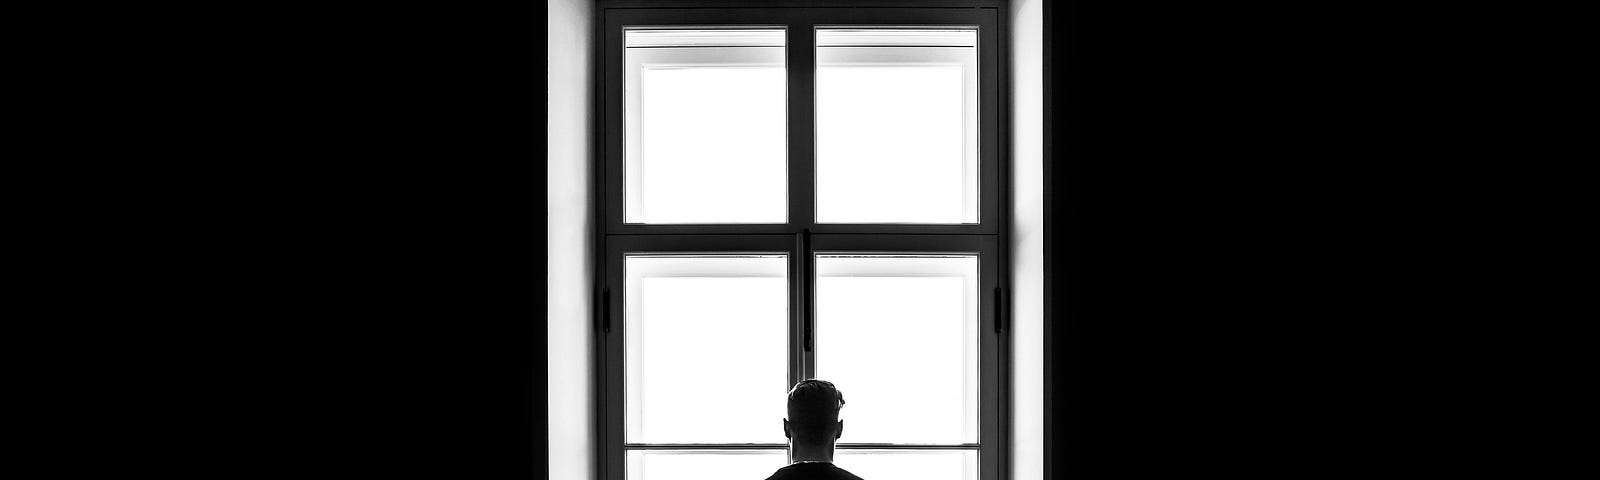 A Dad stands at a window and misses his kids. He is lonely.